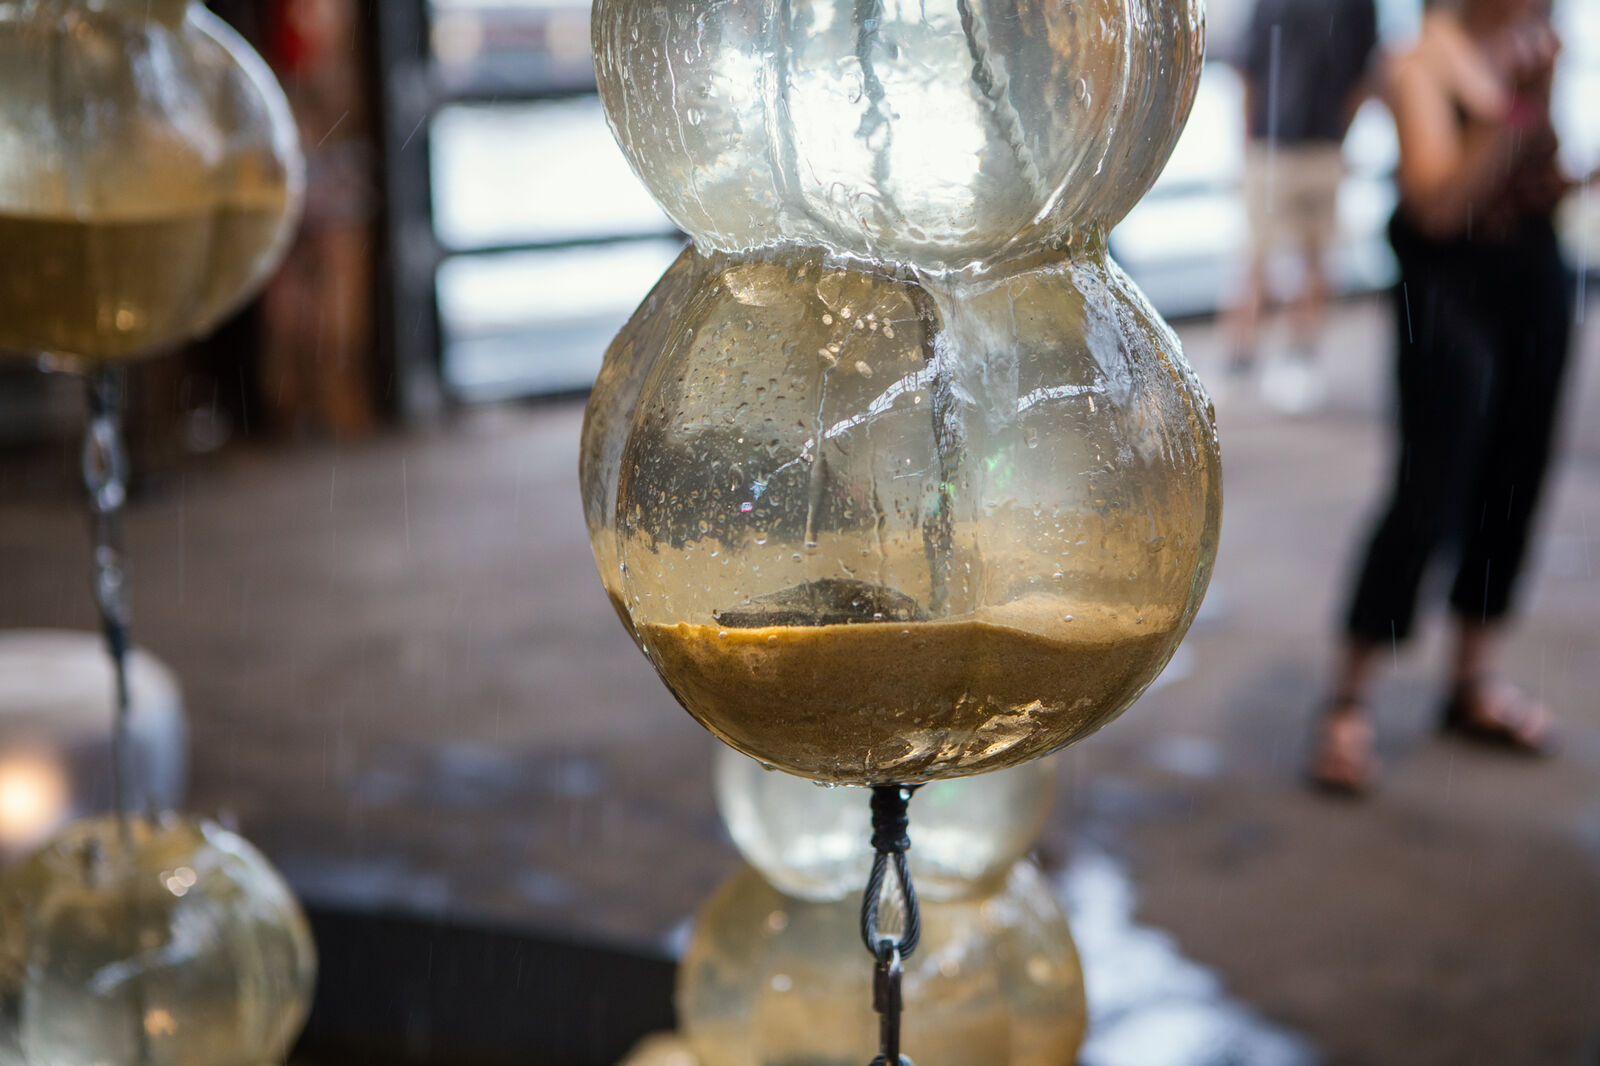 Close-up of a live mussel inside one of the hanging glass vessels that makeup the sculptural fountain installation